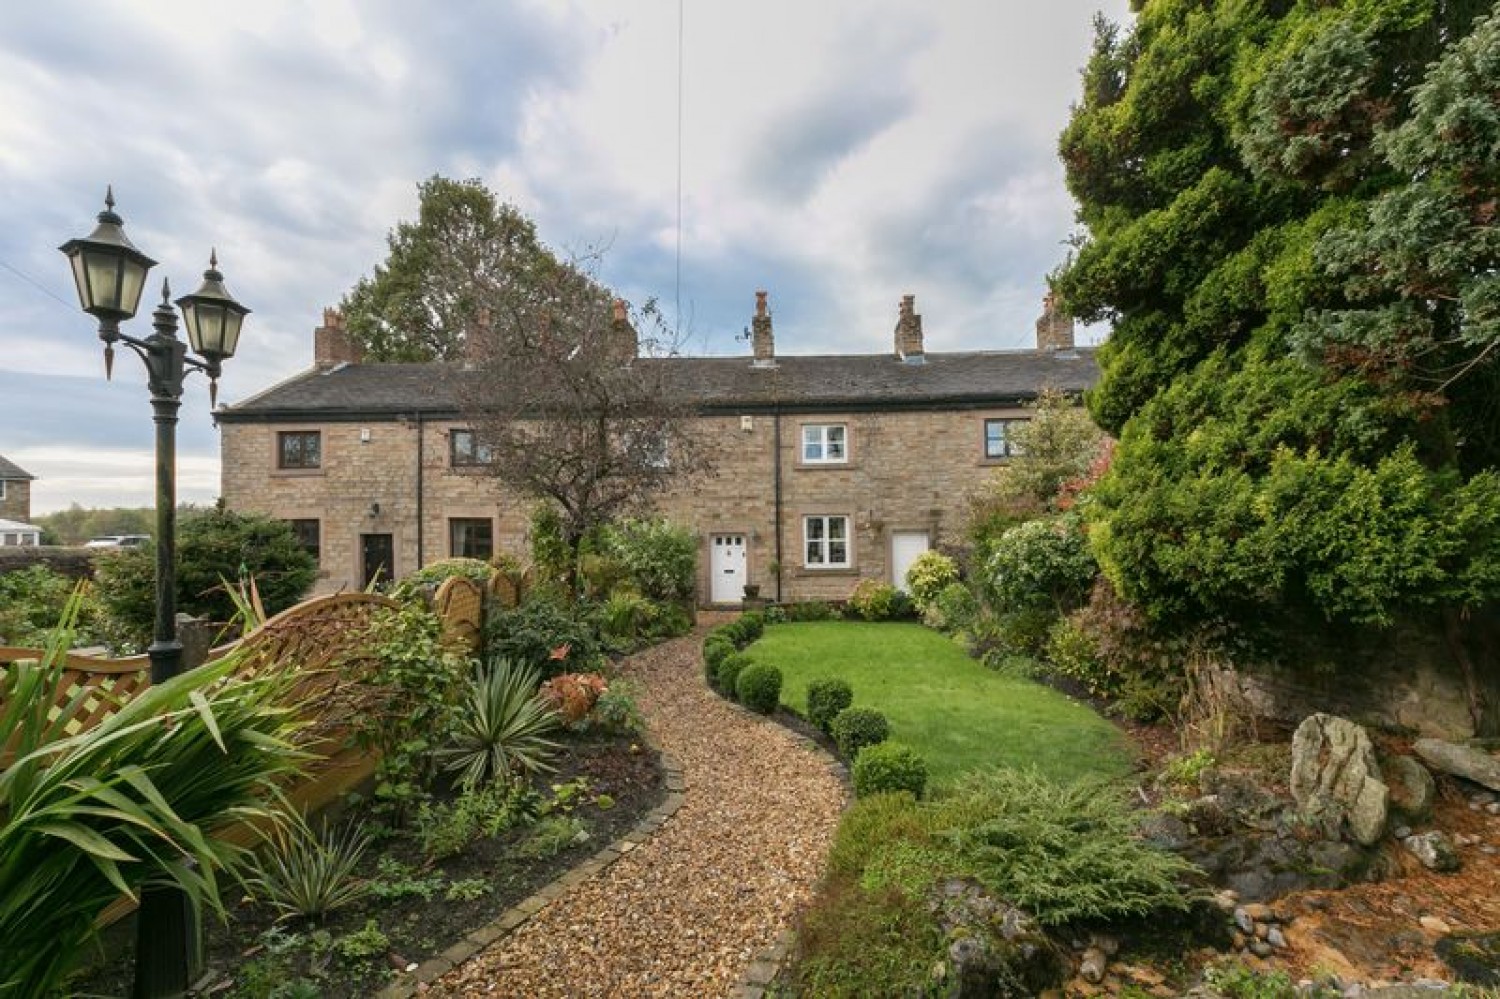 Stunning grade II listed cottage on the market. 